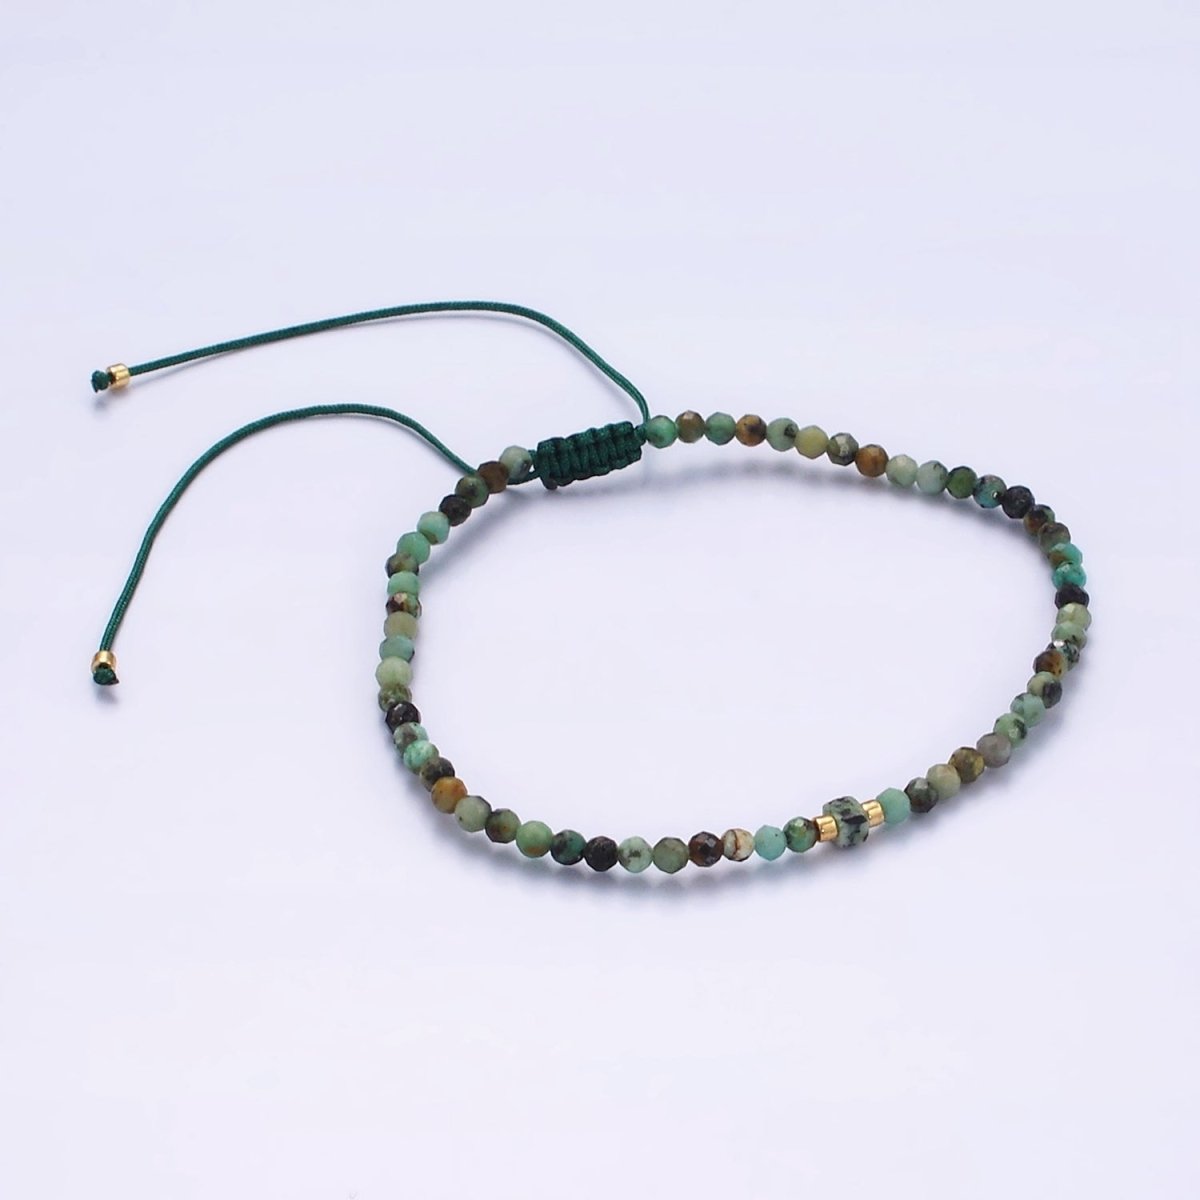 14K Gold Filled Moss Agate Multifaceted Green Rope Adjustable Friendship Bracelet | WA-2174 - WA-2176 Clearance Pricing - DLUXCA